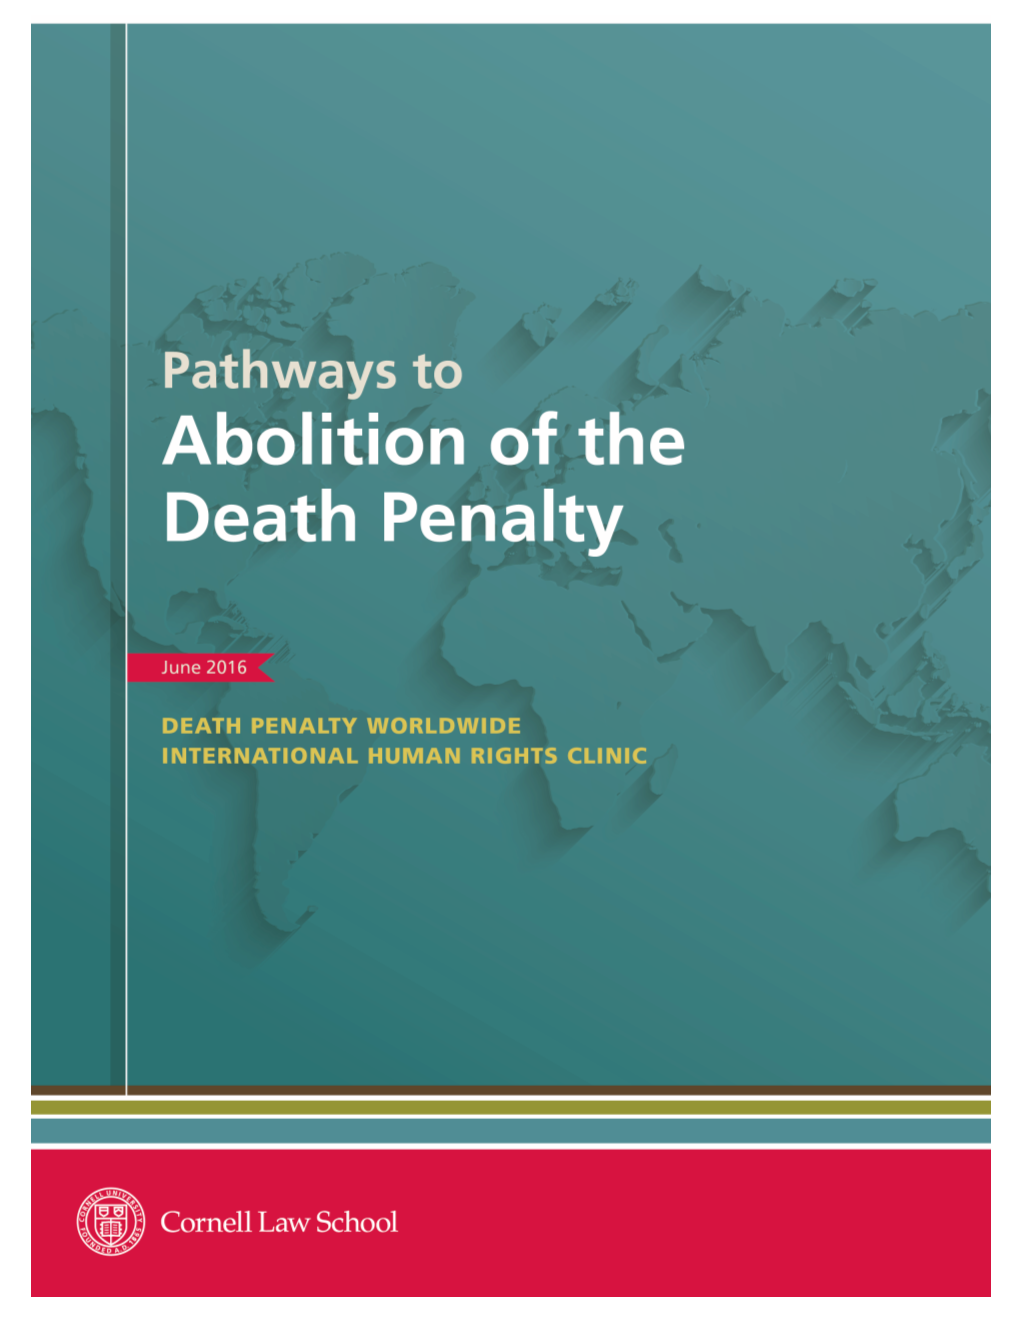 Pathways to Abolition of the Death Penalty